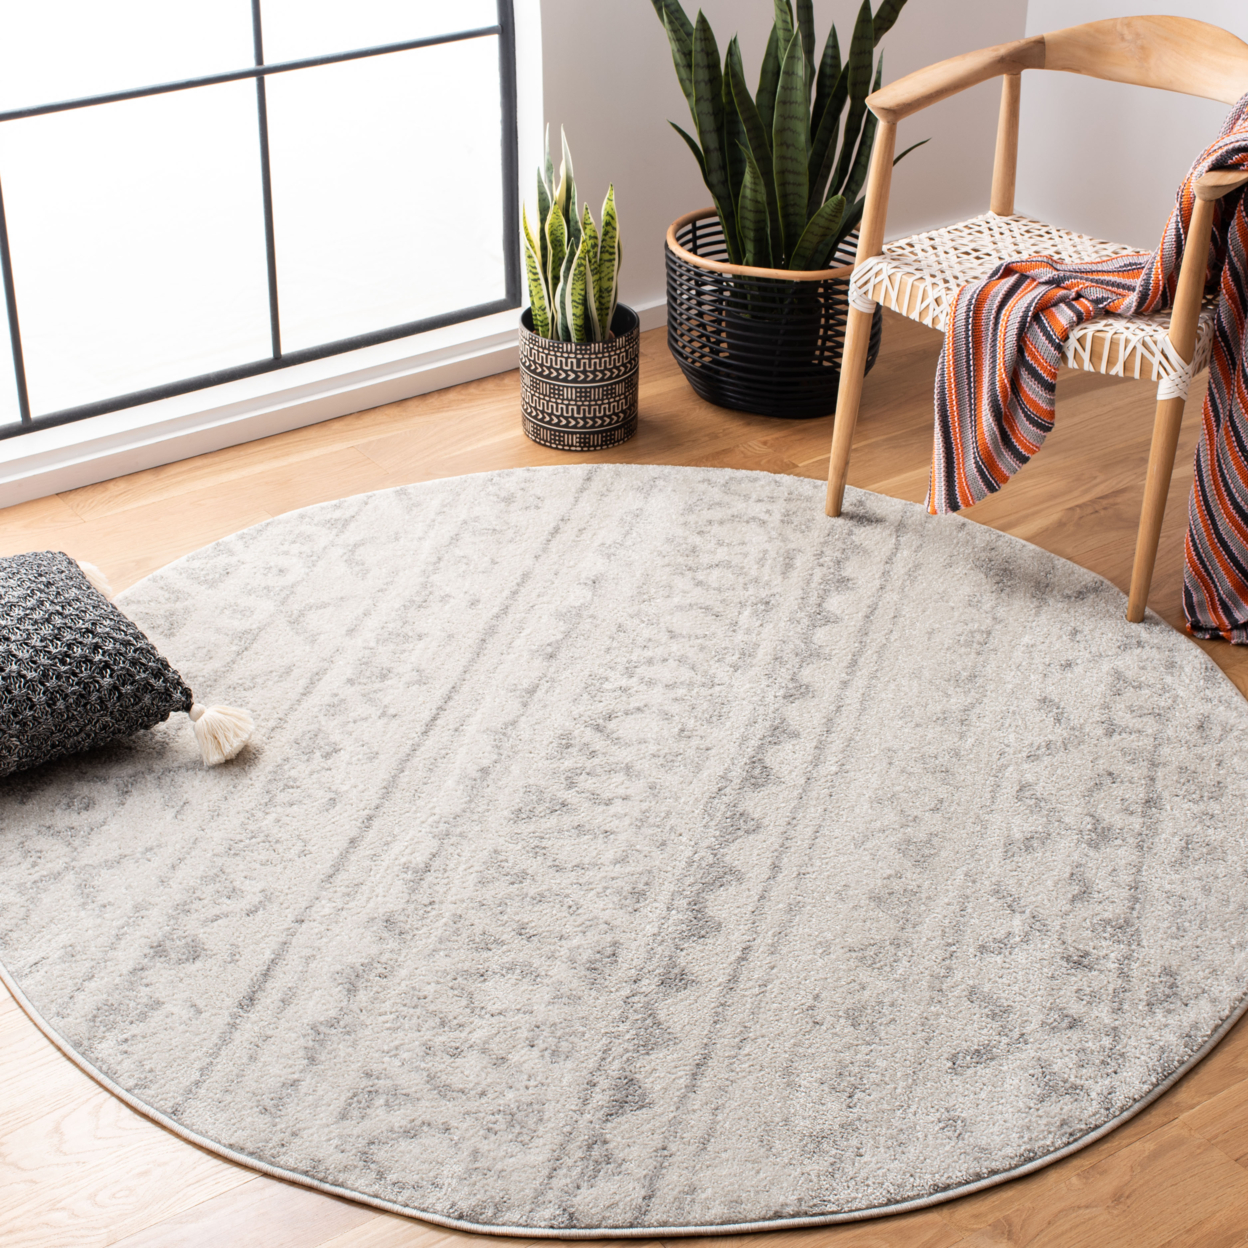 SAFAVIEH Adirondack Collection ADR119A Ivory / Silver Rug - 2' 6 X 12'